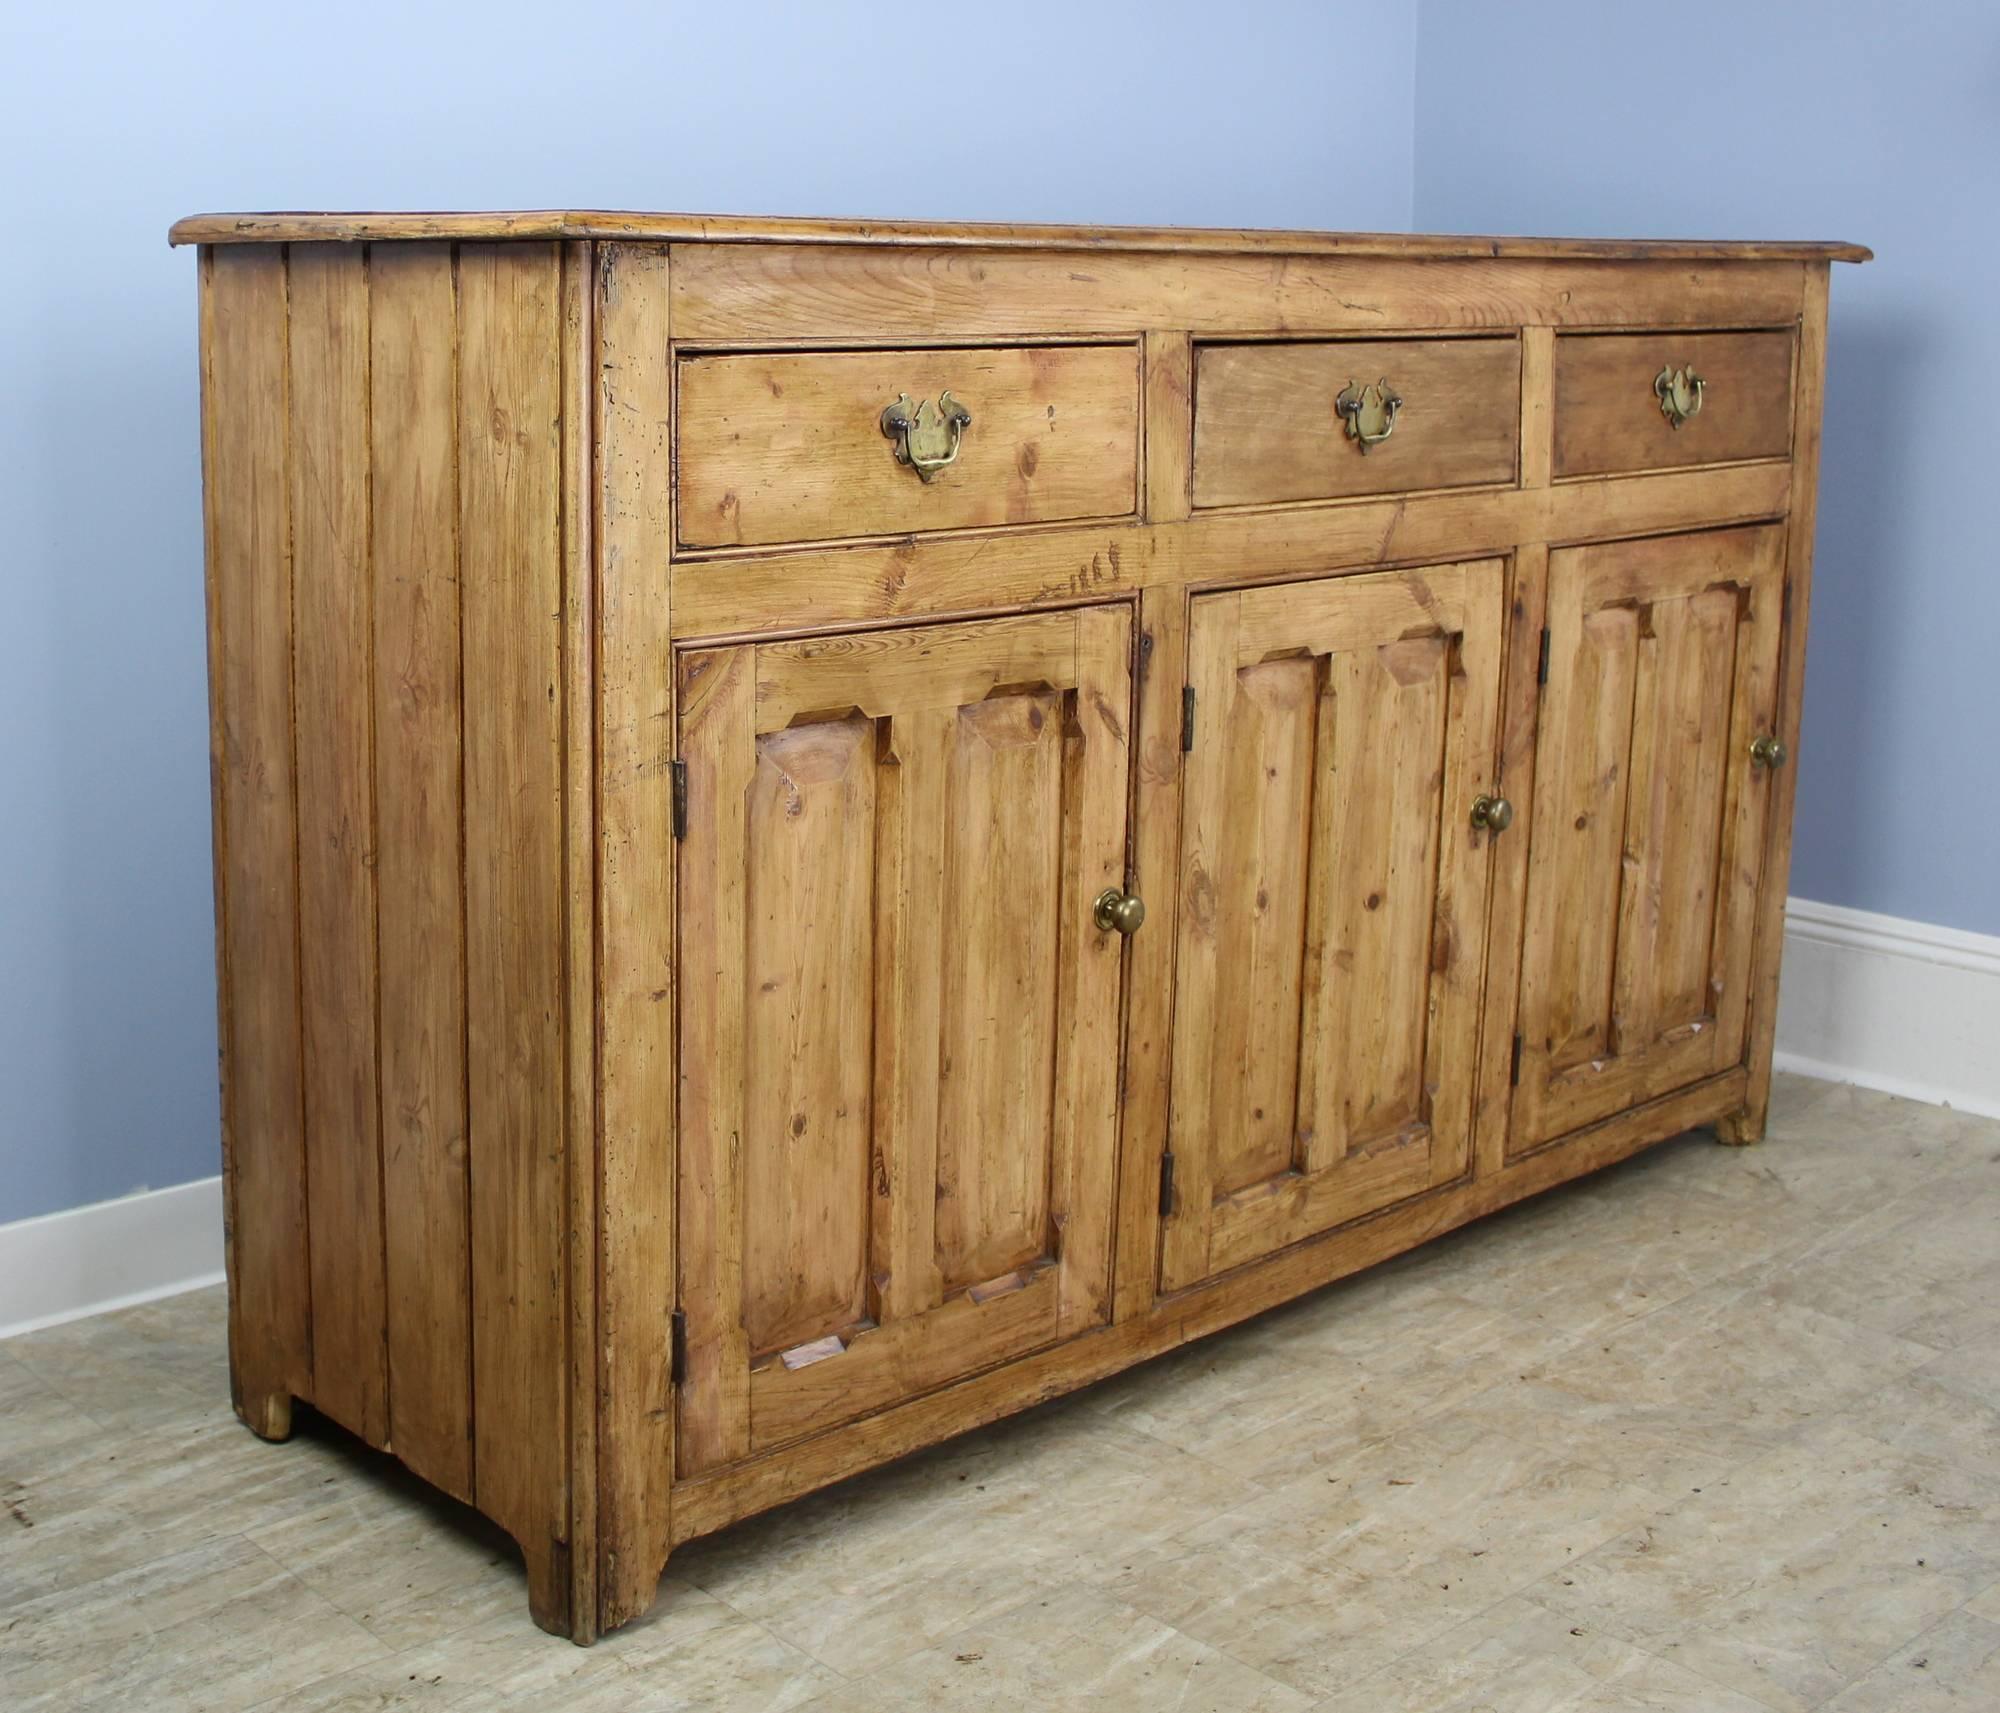 A pretty Welsh pine cupboard, sideboard or enfilade with rich patina and good honey color. Inset double panels on the doors add a nice design note. All of the three roomy drawers slide easily. The shelves in the three cupboards beneath are not